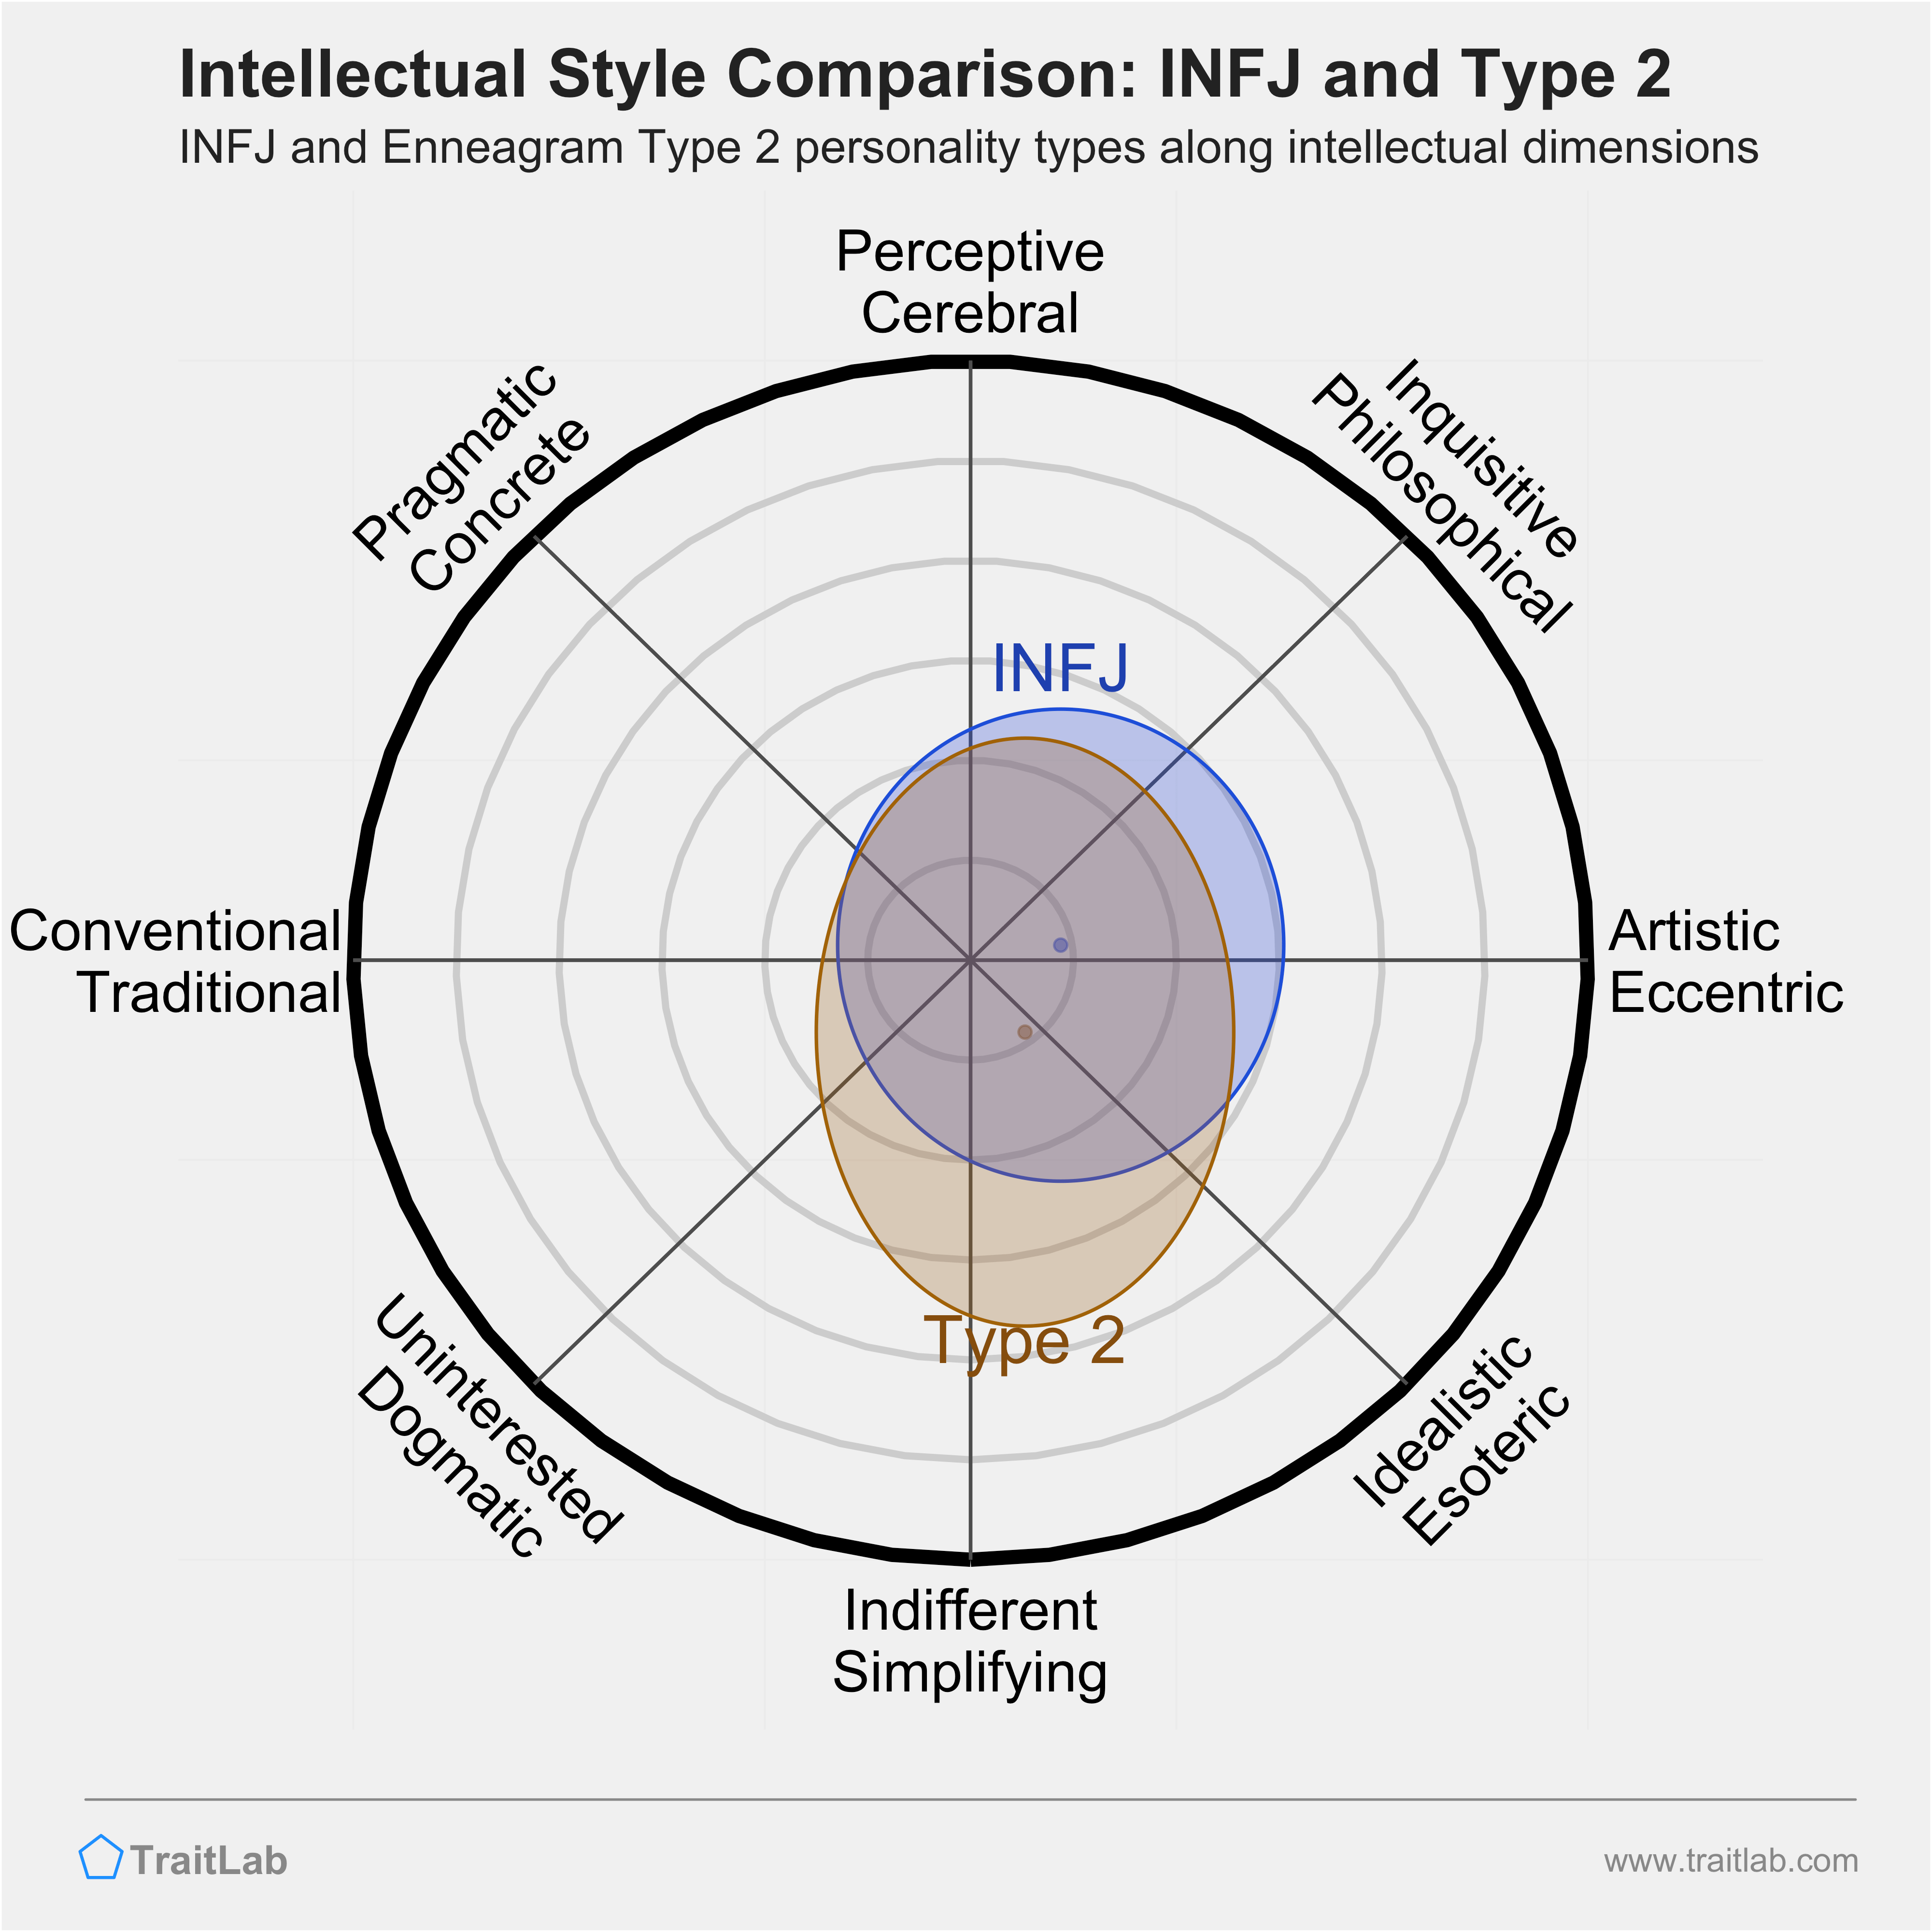 INFJ and Type 2 comparison across intellectual dimensions